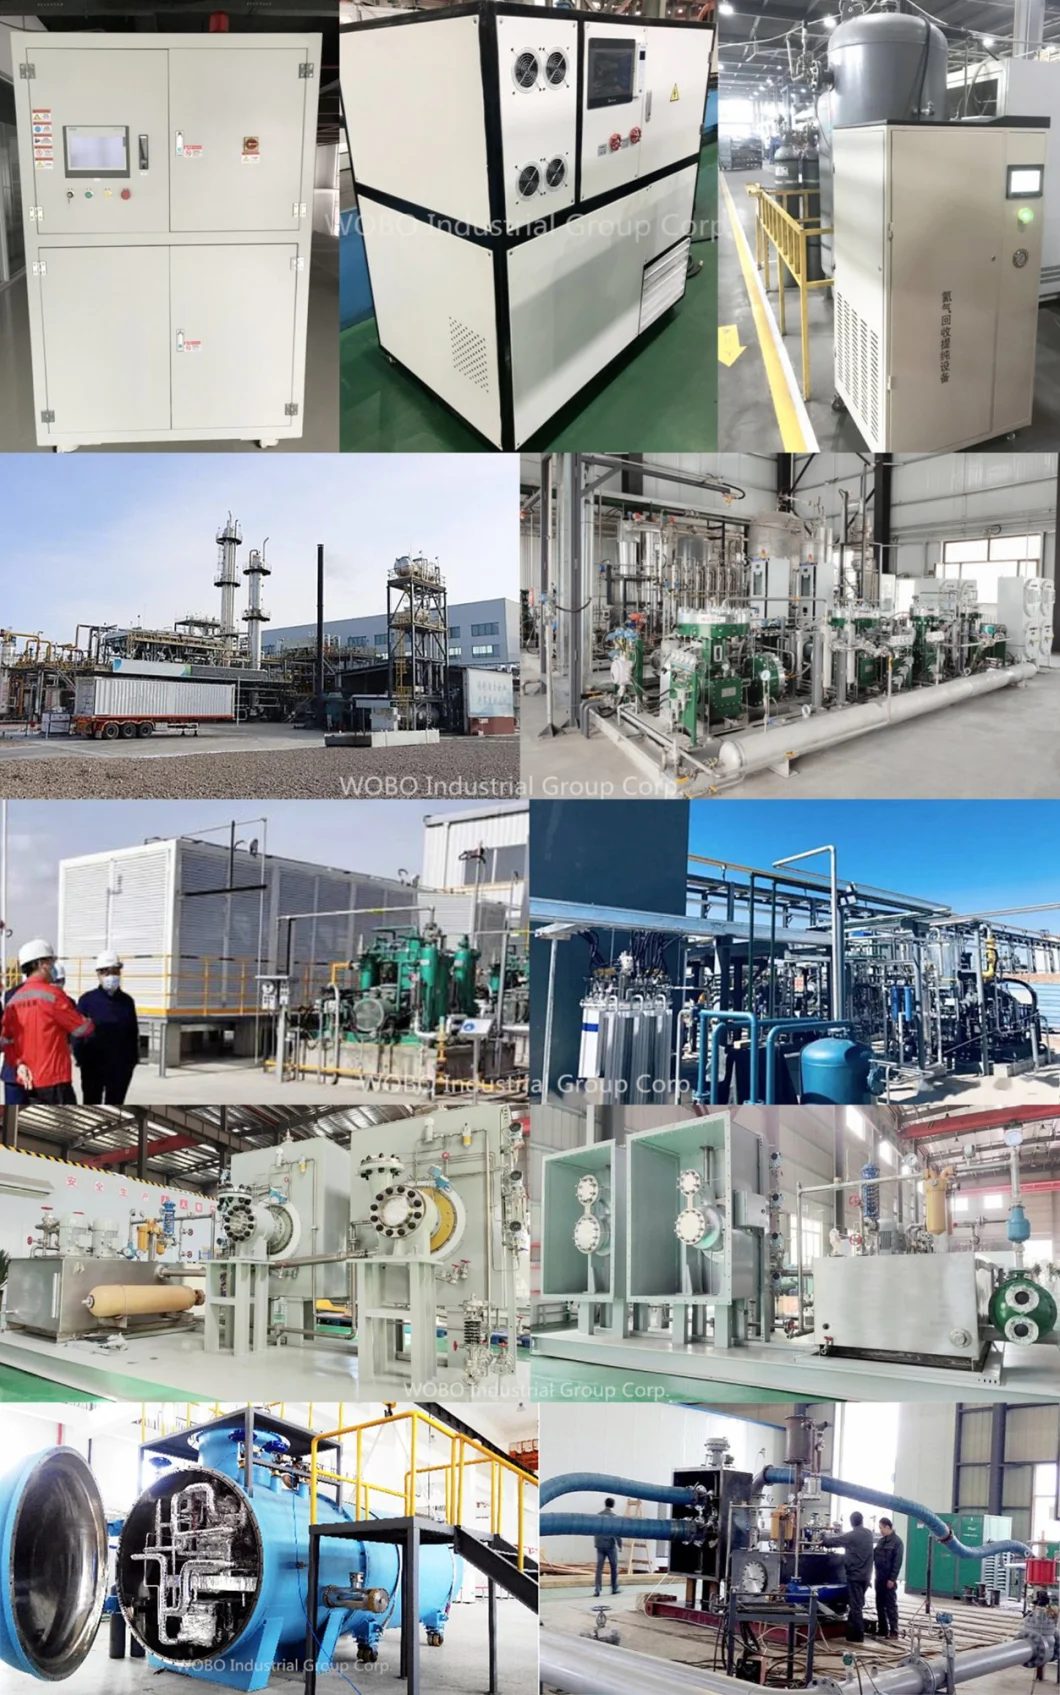 Air Separation Helium Extraction Device for New Energy Factory